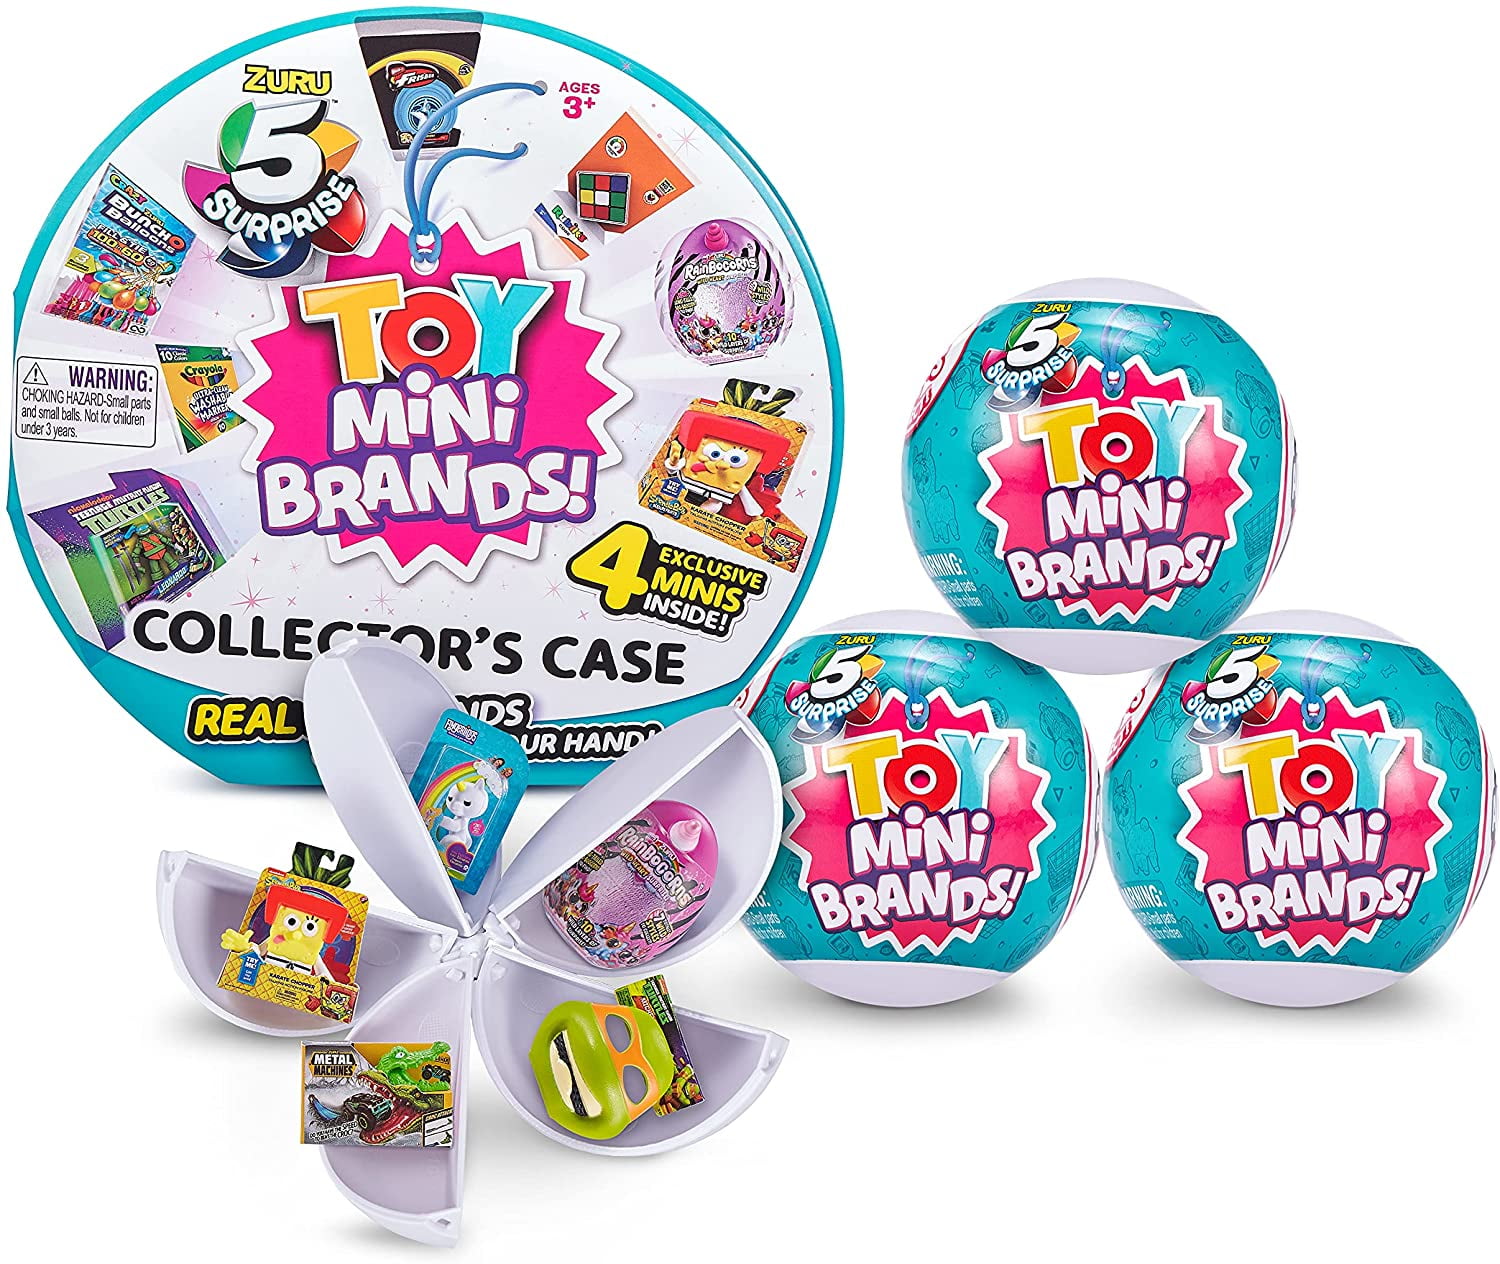 5 Surprise Mini Brands Series 2 Collector's Kit. Exclusive Mystery Capsule Real Miniature Brands by Zuru 3 Capsules + 1 Collector's Case